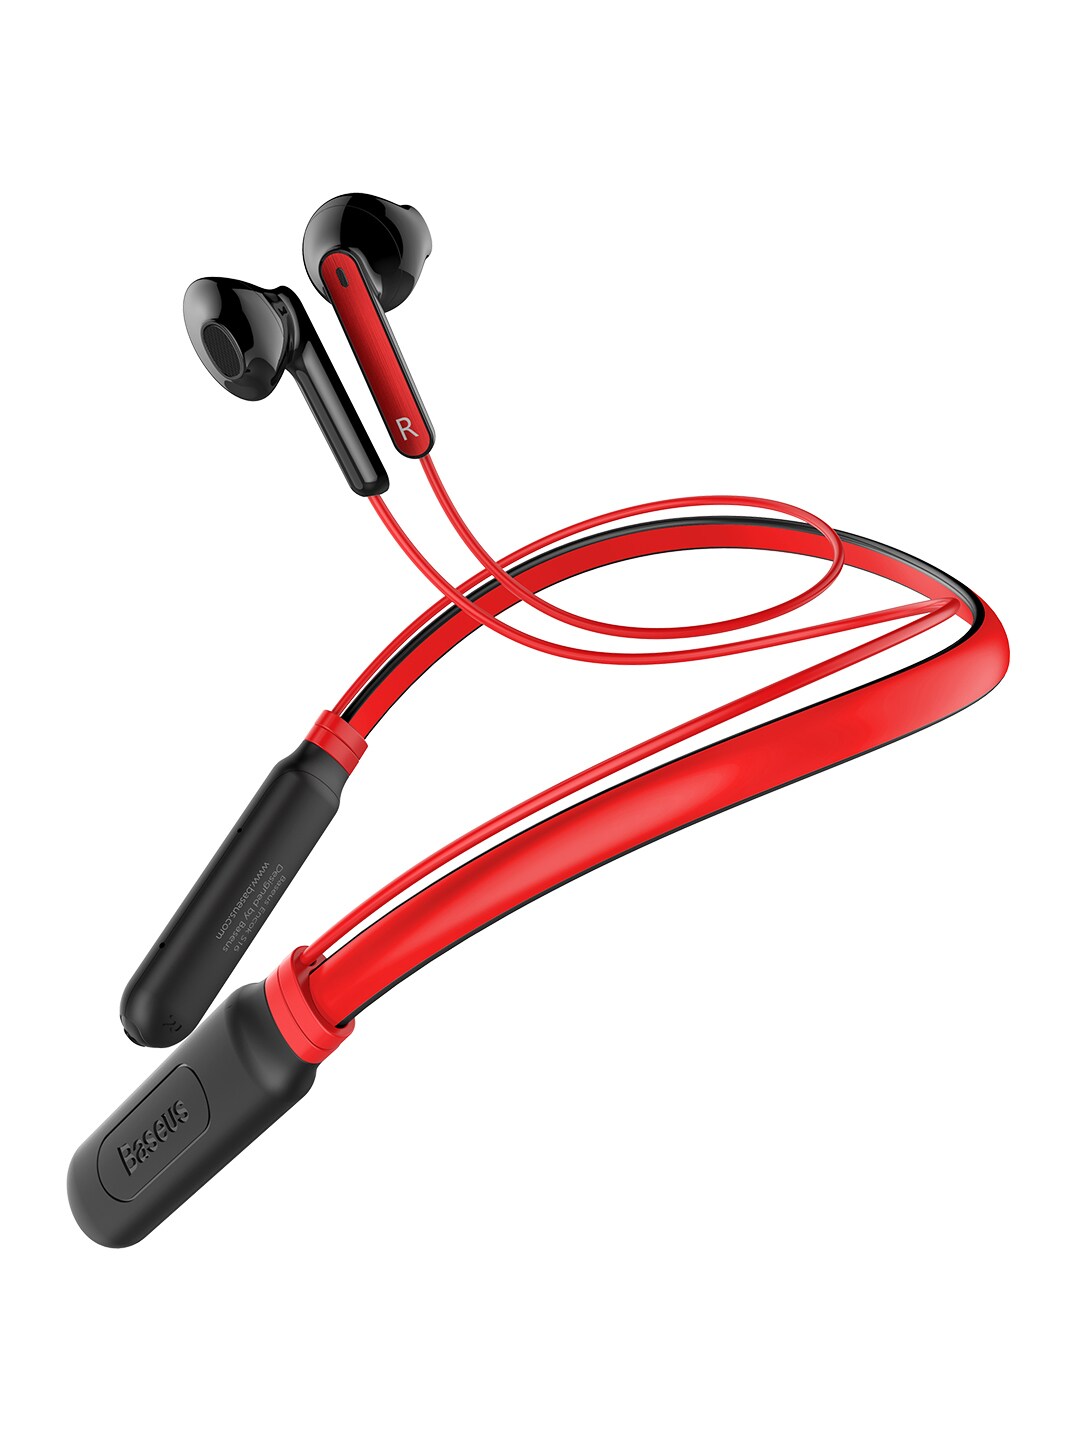 Baseus Unisex Red Neckband Earphones with Bluetooth 4.0 Noise Reduction System Price in India